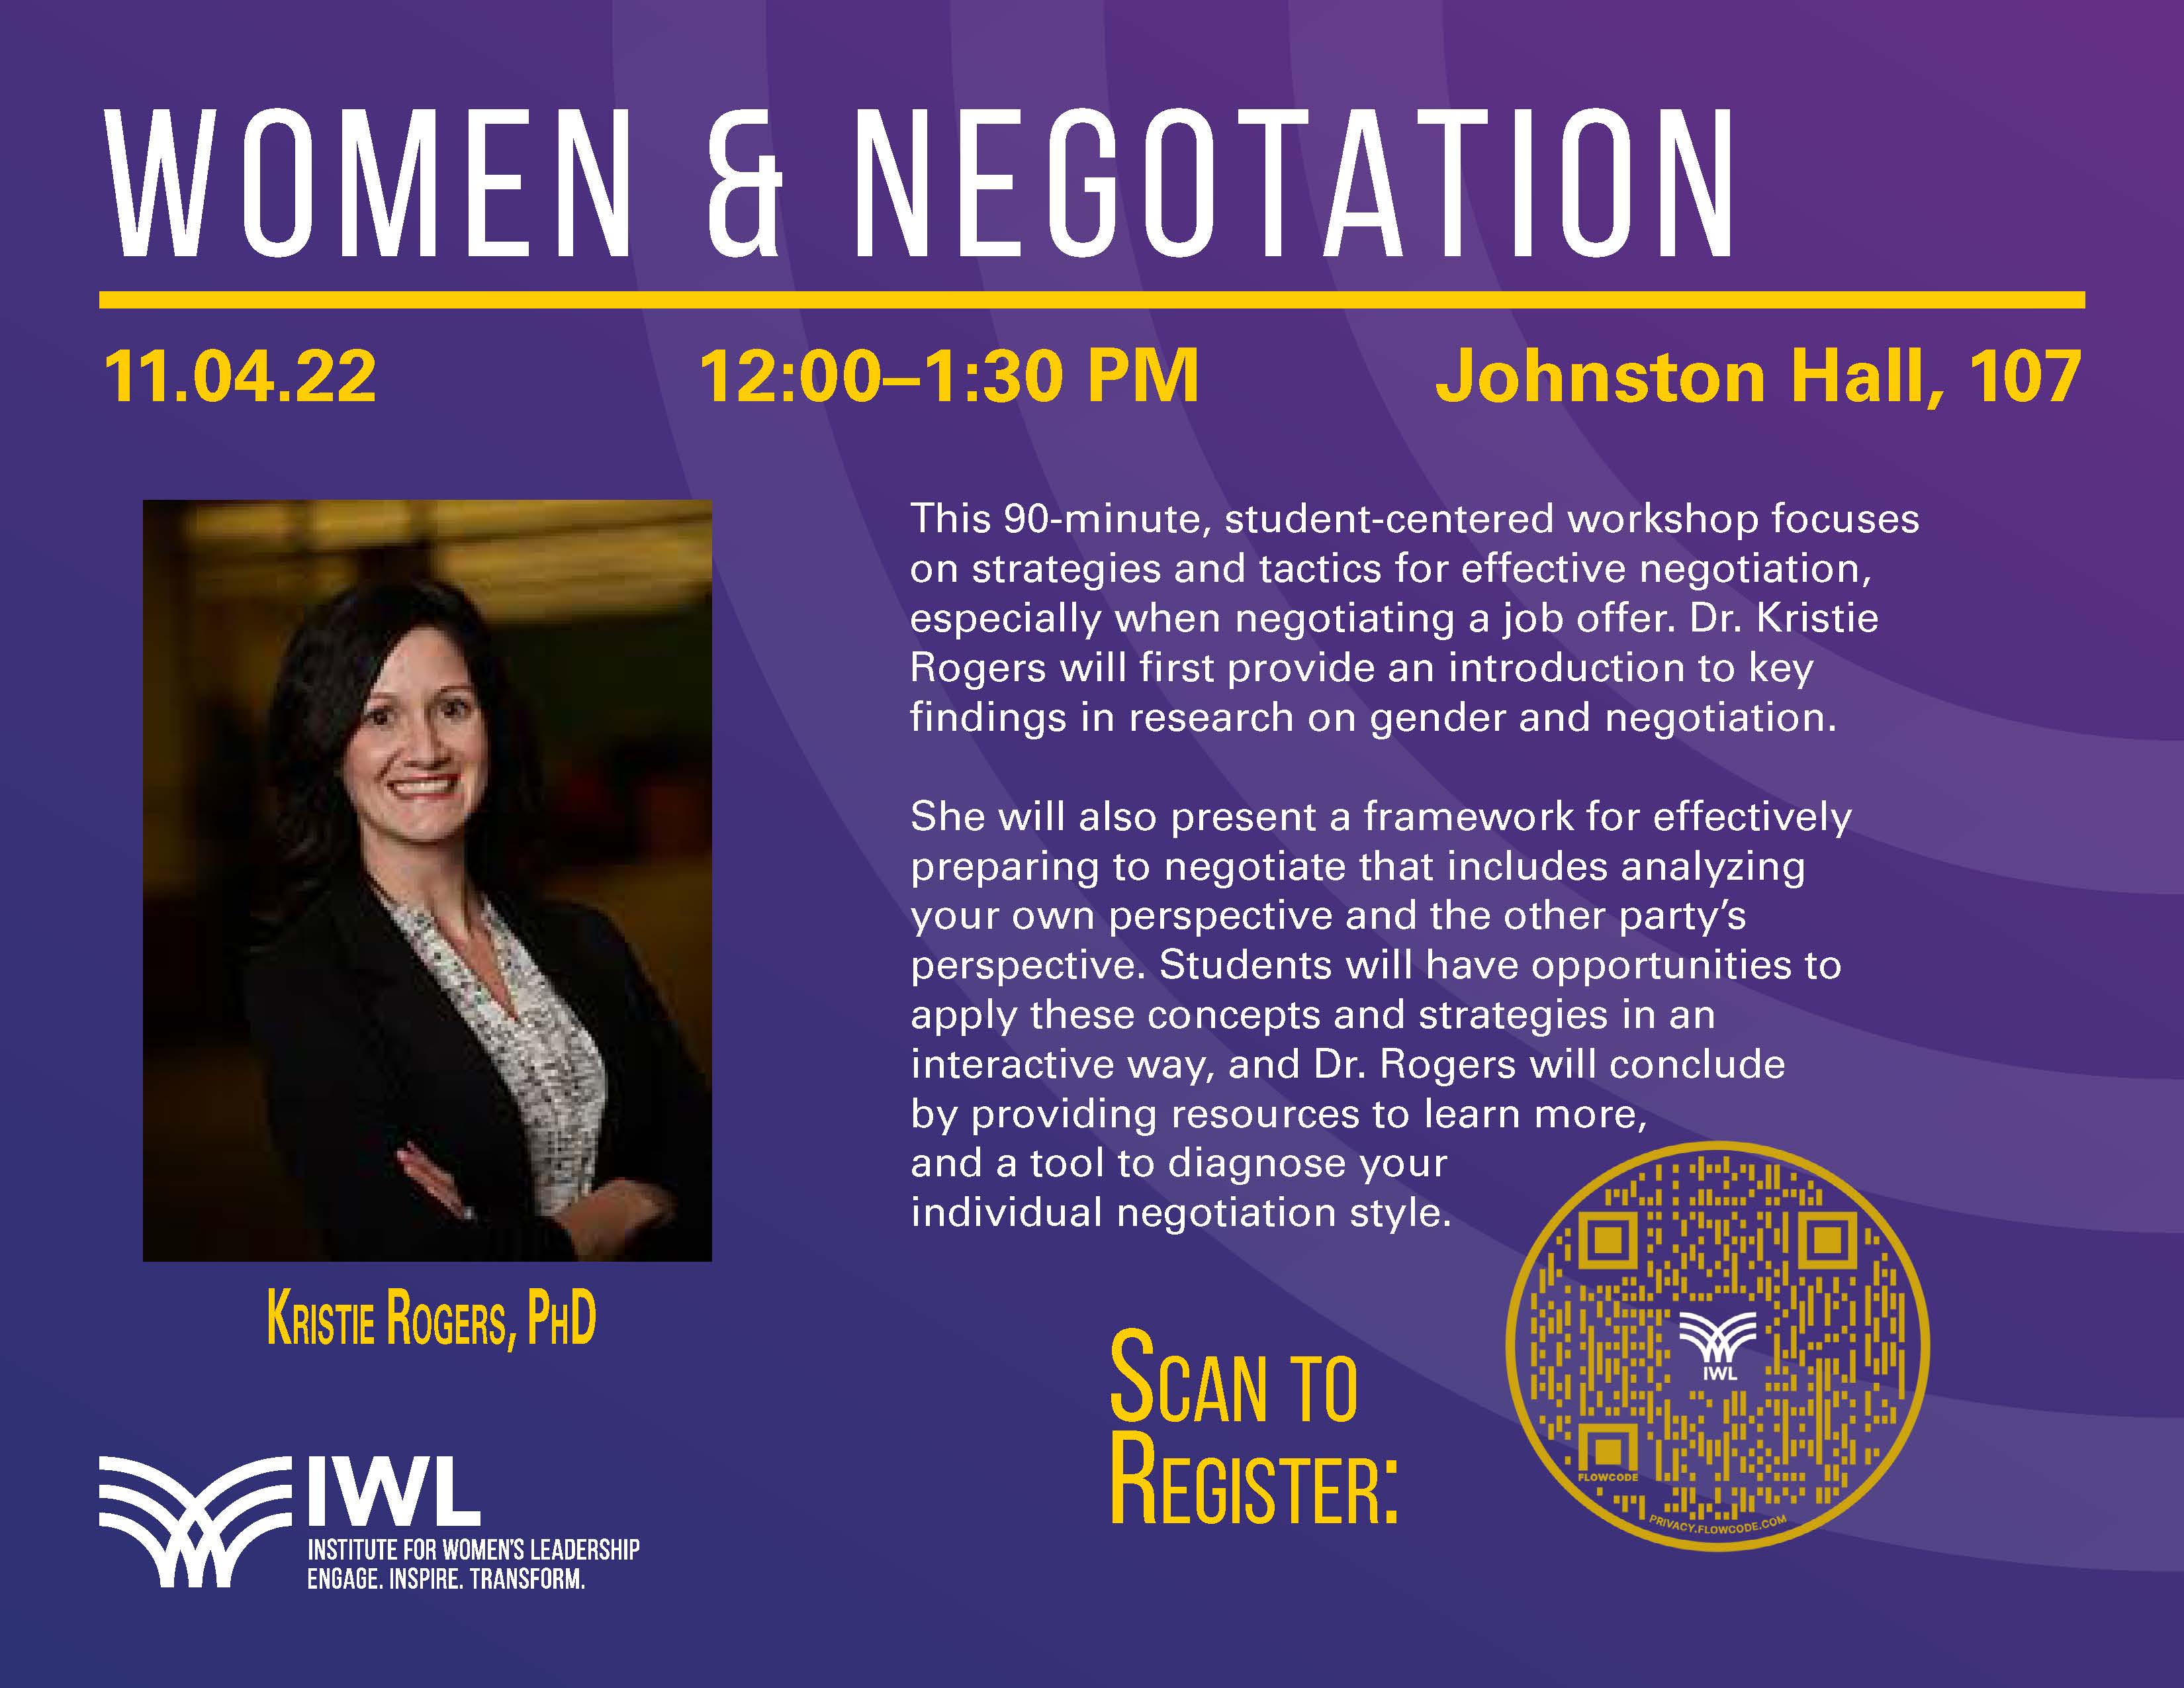 Women and negotiation